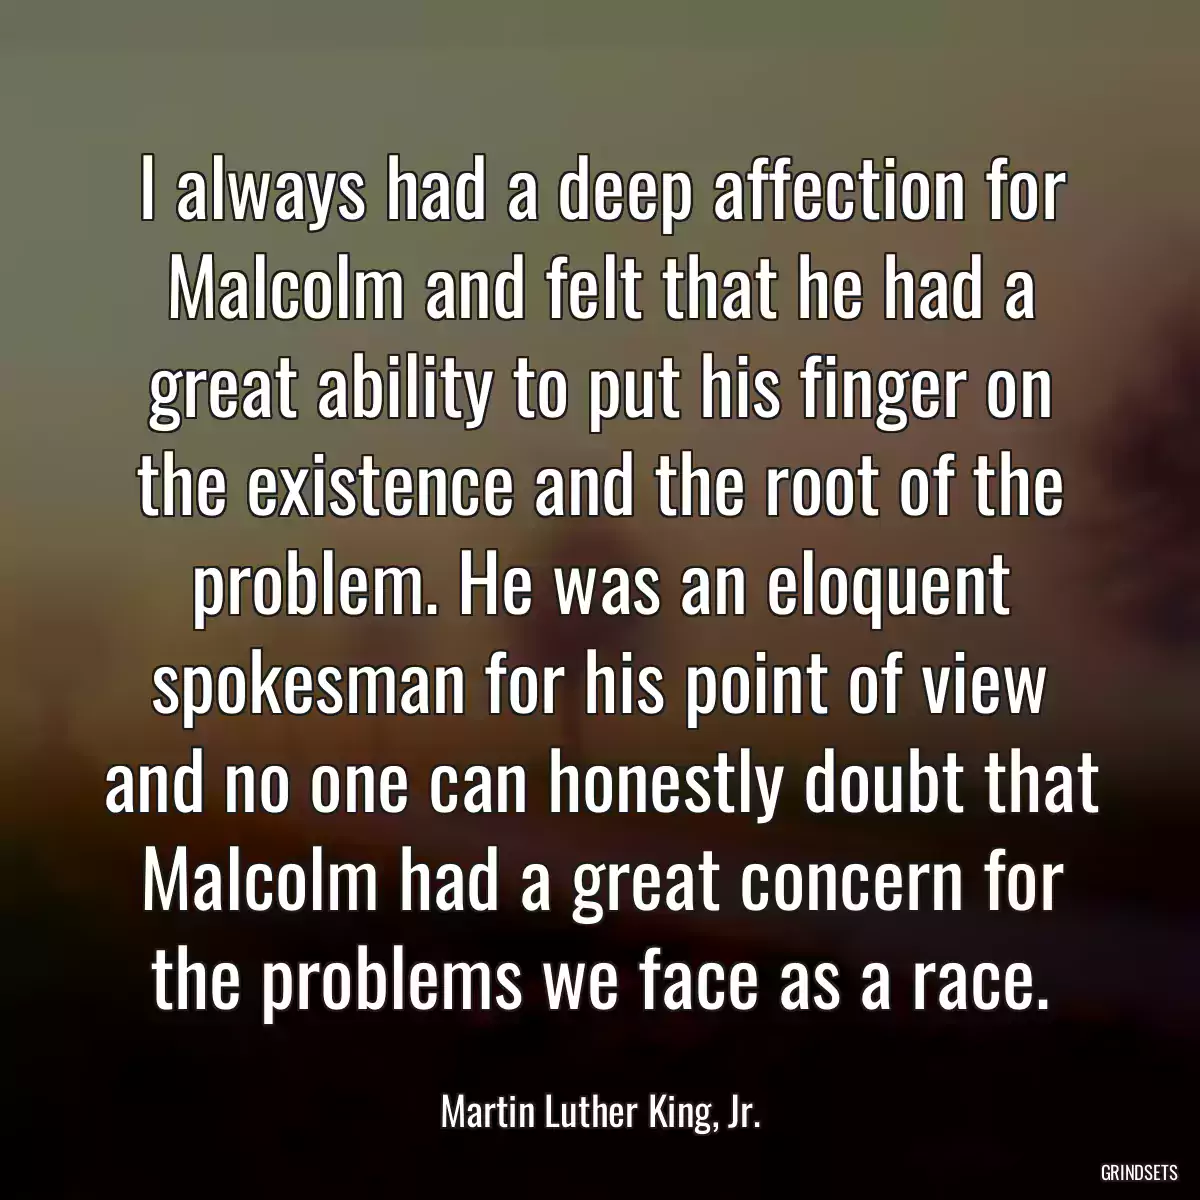 I always had a deep affection for Malcolm and felt that he had a great ability to put his finger on the existence and the root of the problem. He was an eloquent spokesman for his point of view and no one can honestly doubt that Malcolm had a great concern for the problems we face as a race.